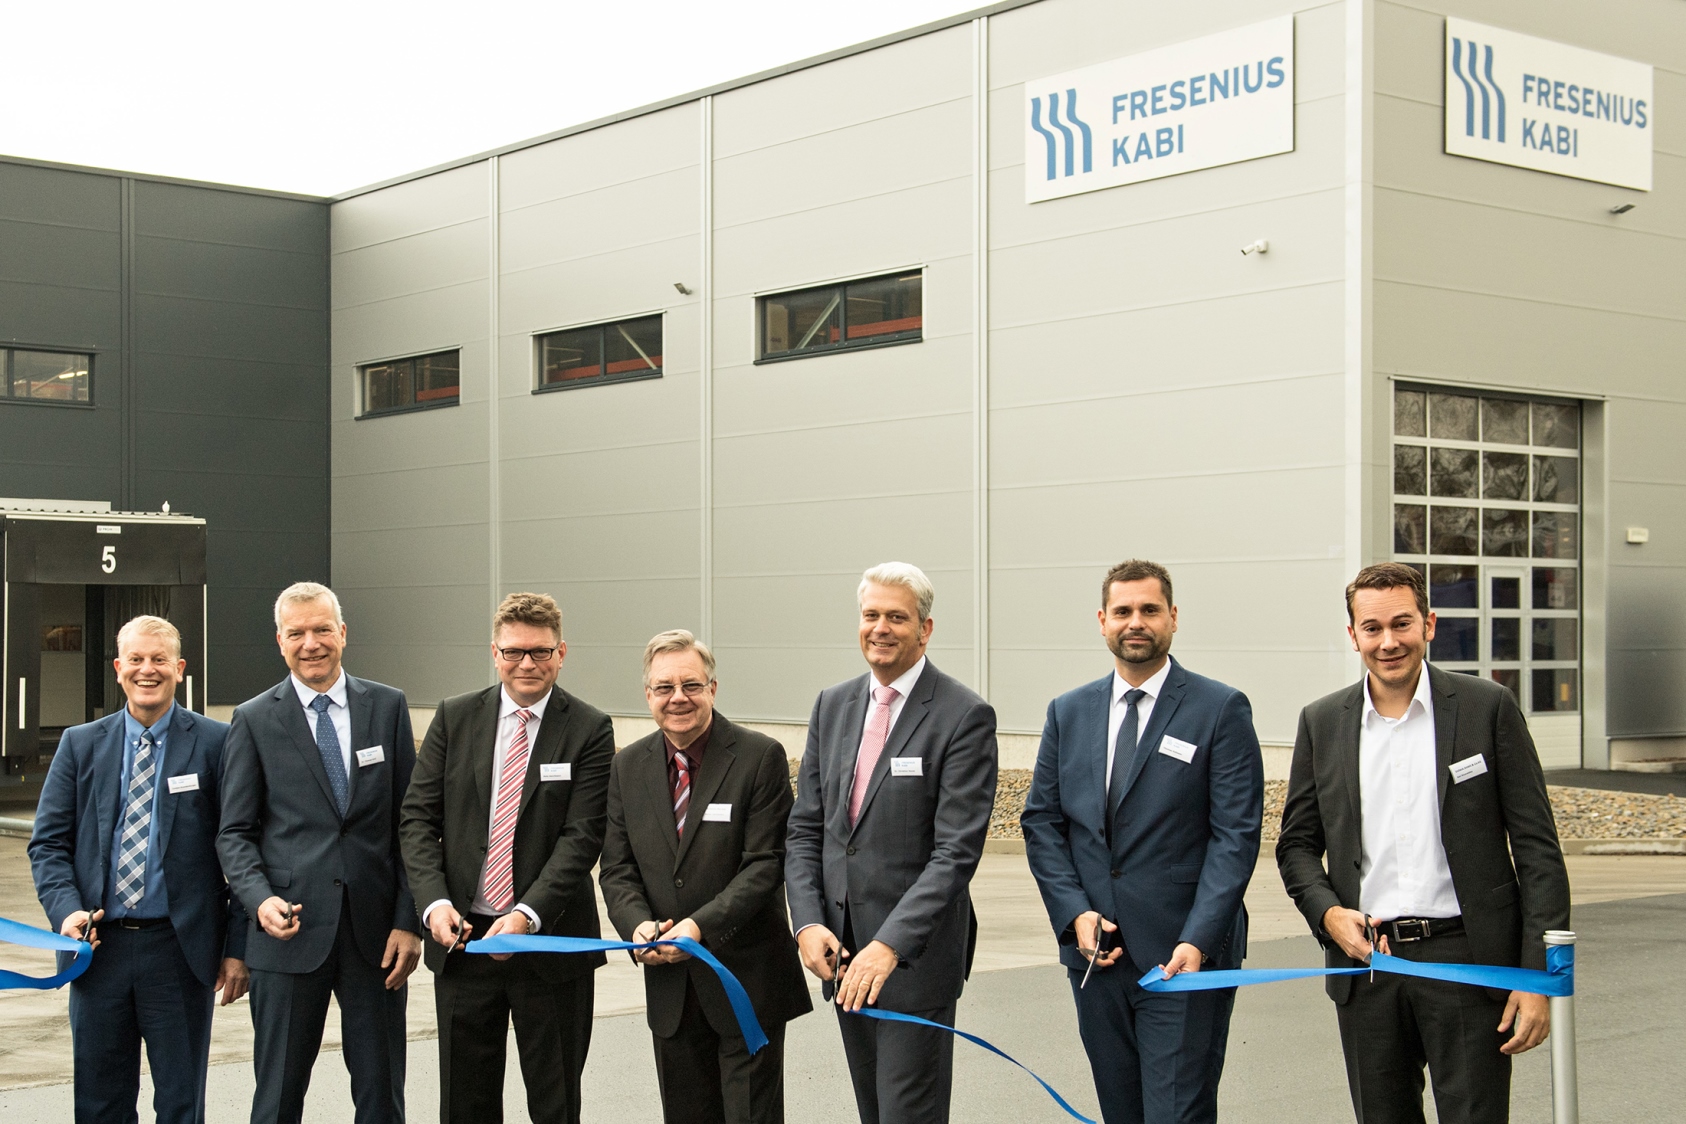 Fresenius Kabi opens extension at production plant in Mihla, Germany